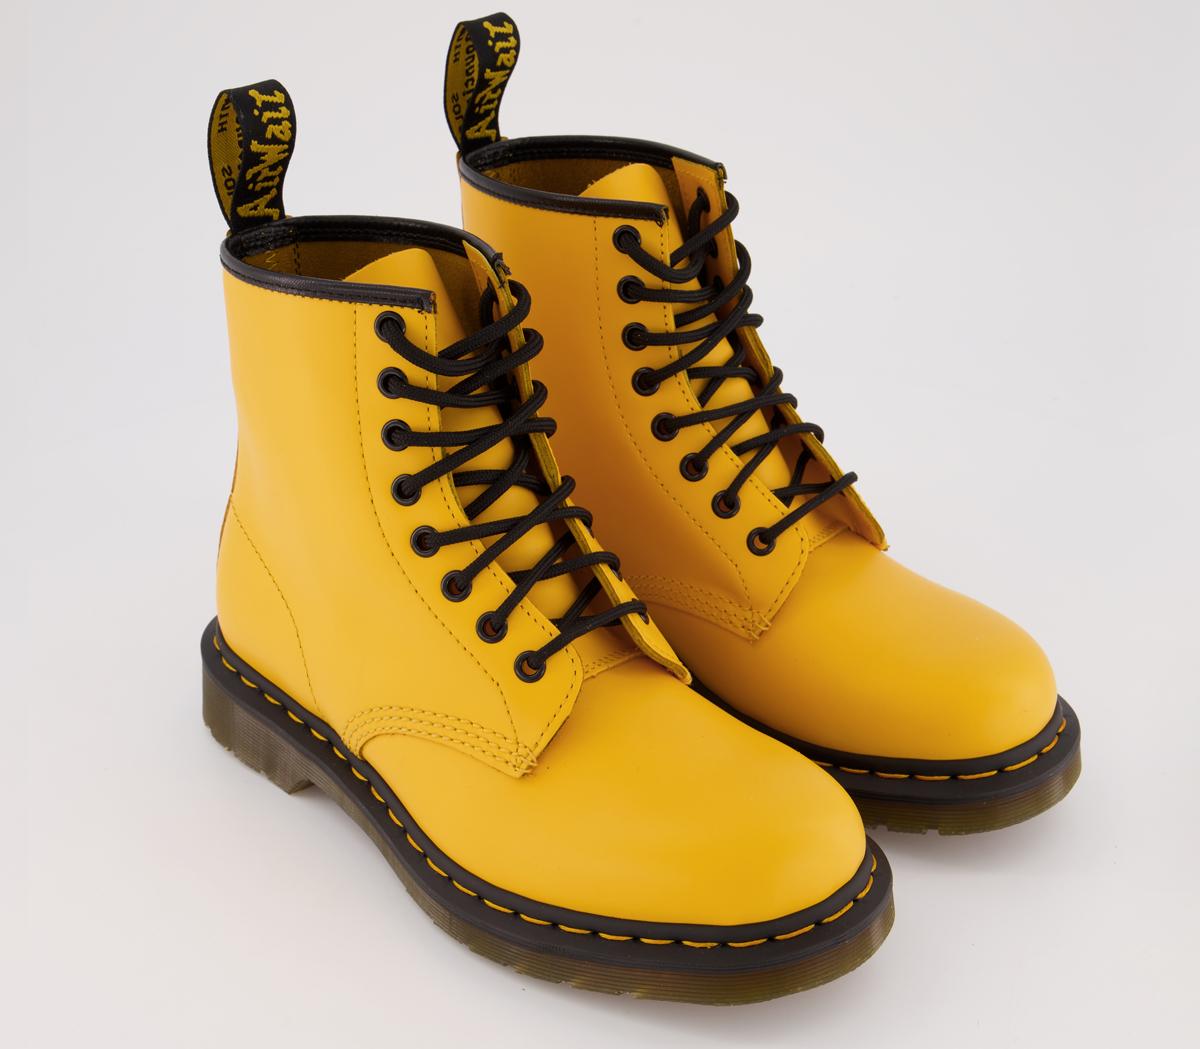 Dr. Martens 8 Eyelet Lace Up Boots Yellow - Ankle Boots